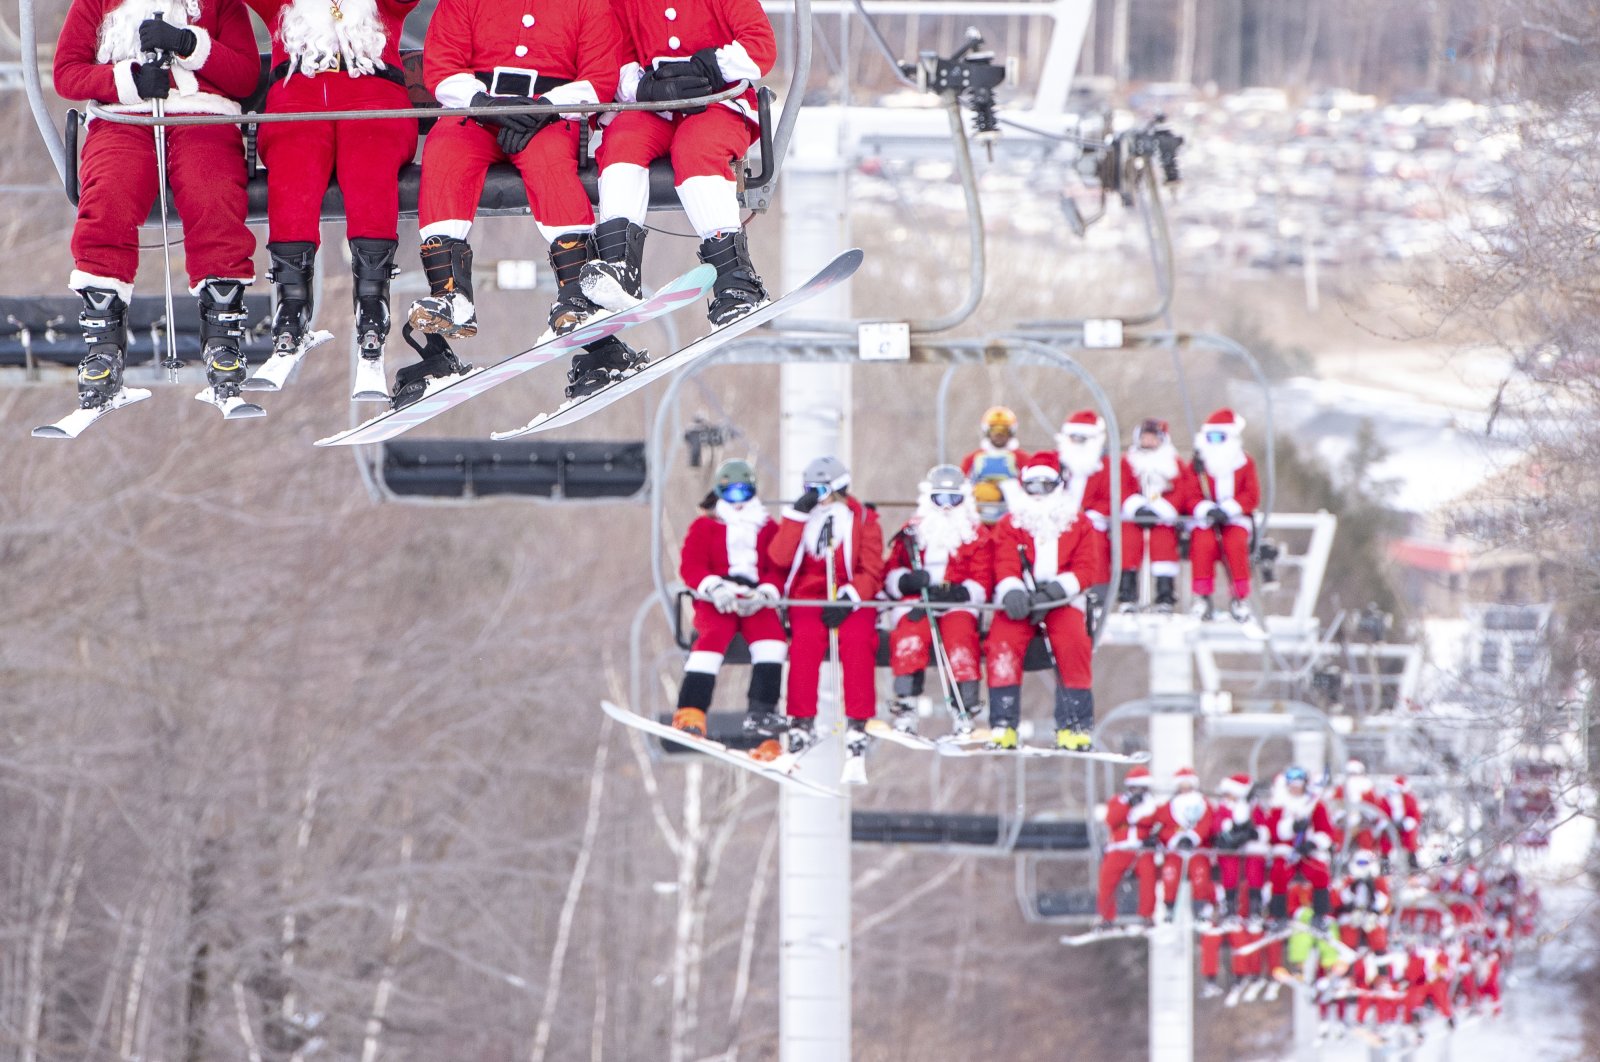 Skiers and snowboarders hit the slopes at Sunday River Ski Resort in Newry, Maine, U.S., Dec. 5, 2021. (Andree Kehn/Sun Journal via AP)